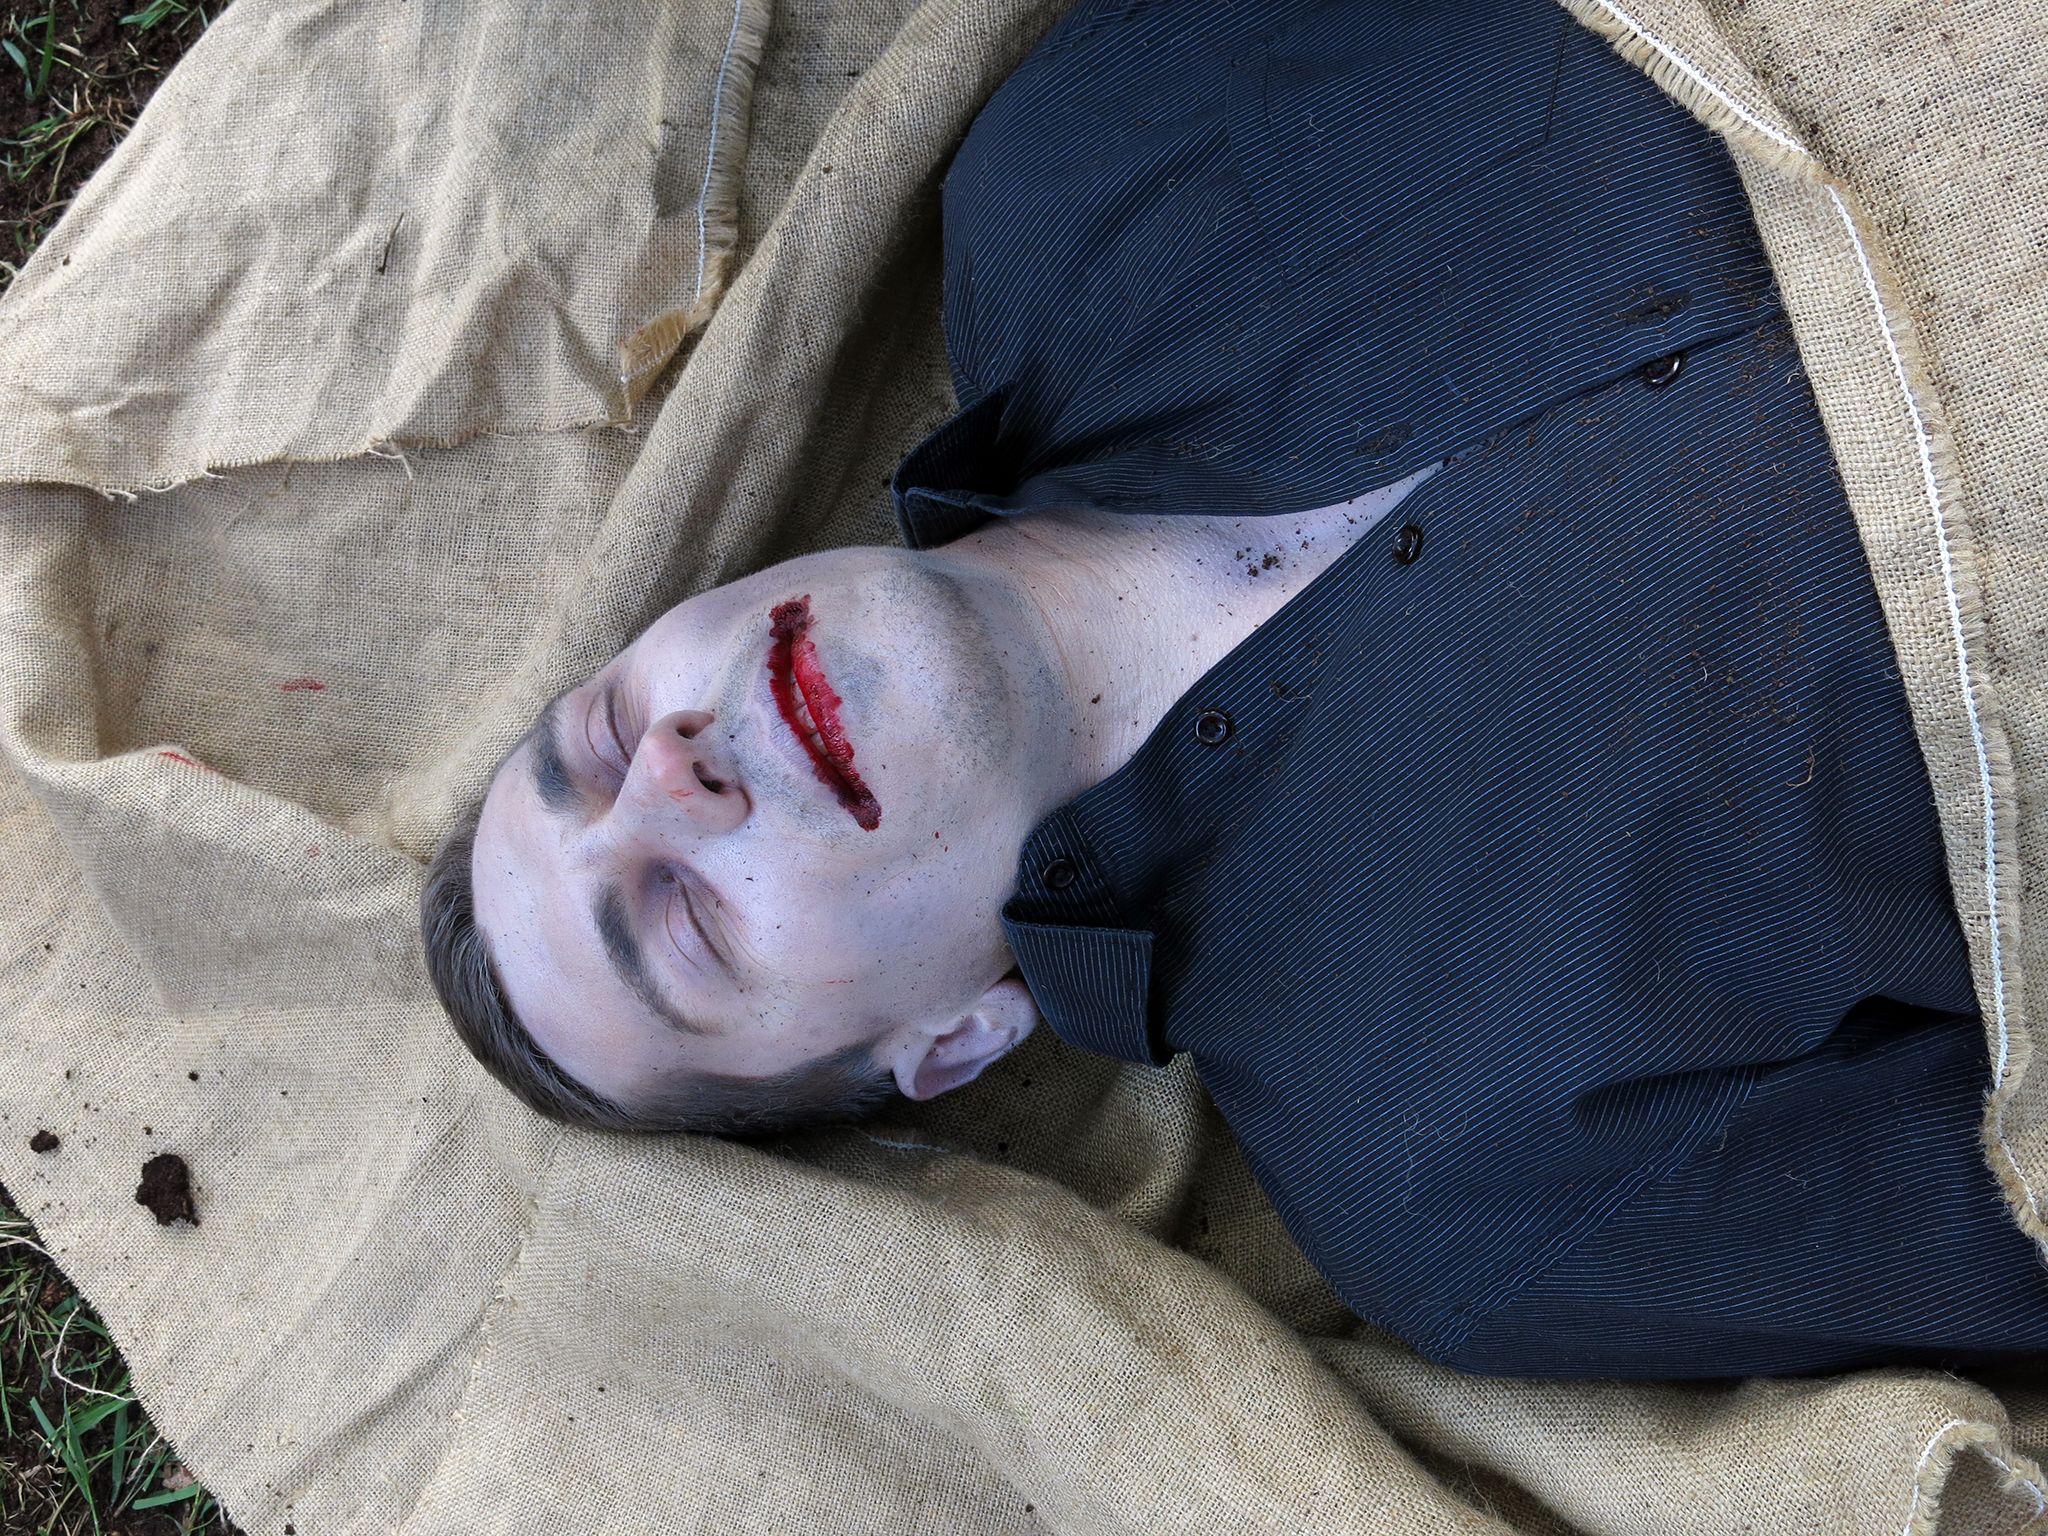 Drama Reconstruction: The exhumed body during the ritual of putting to rest a strigoi. â¨A... [Photo of the day - November 2014]